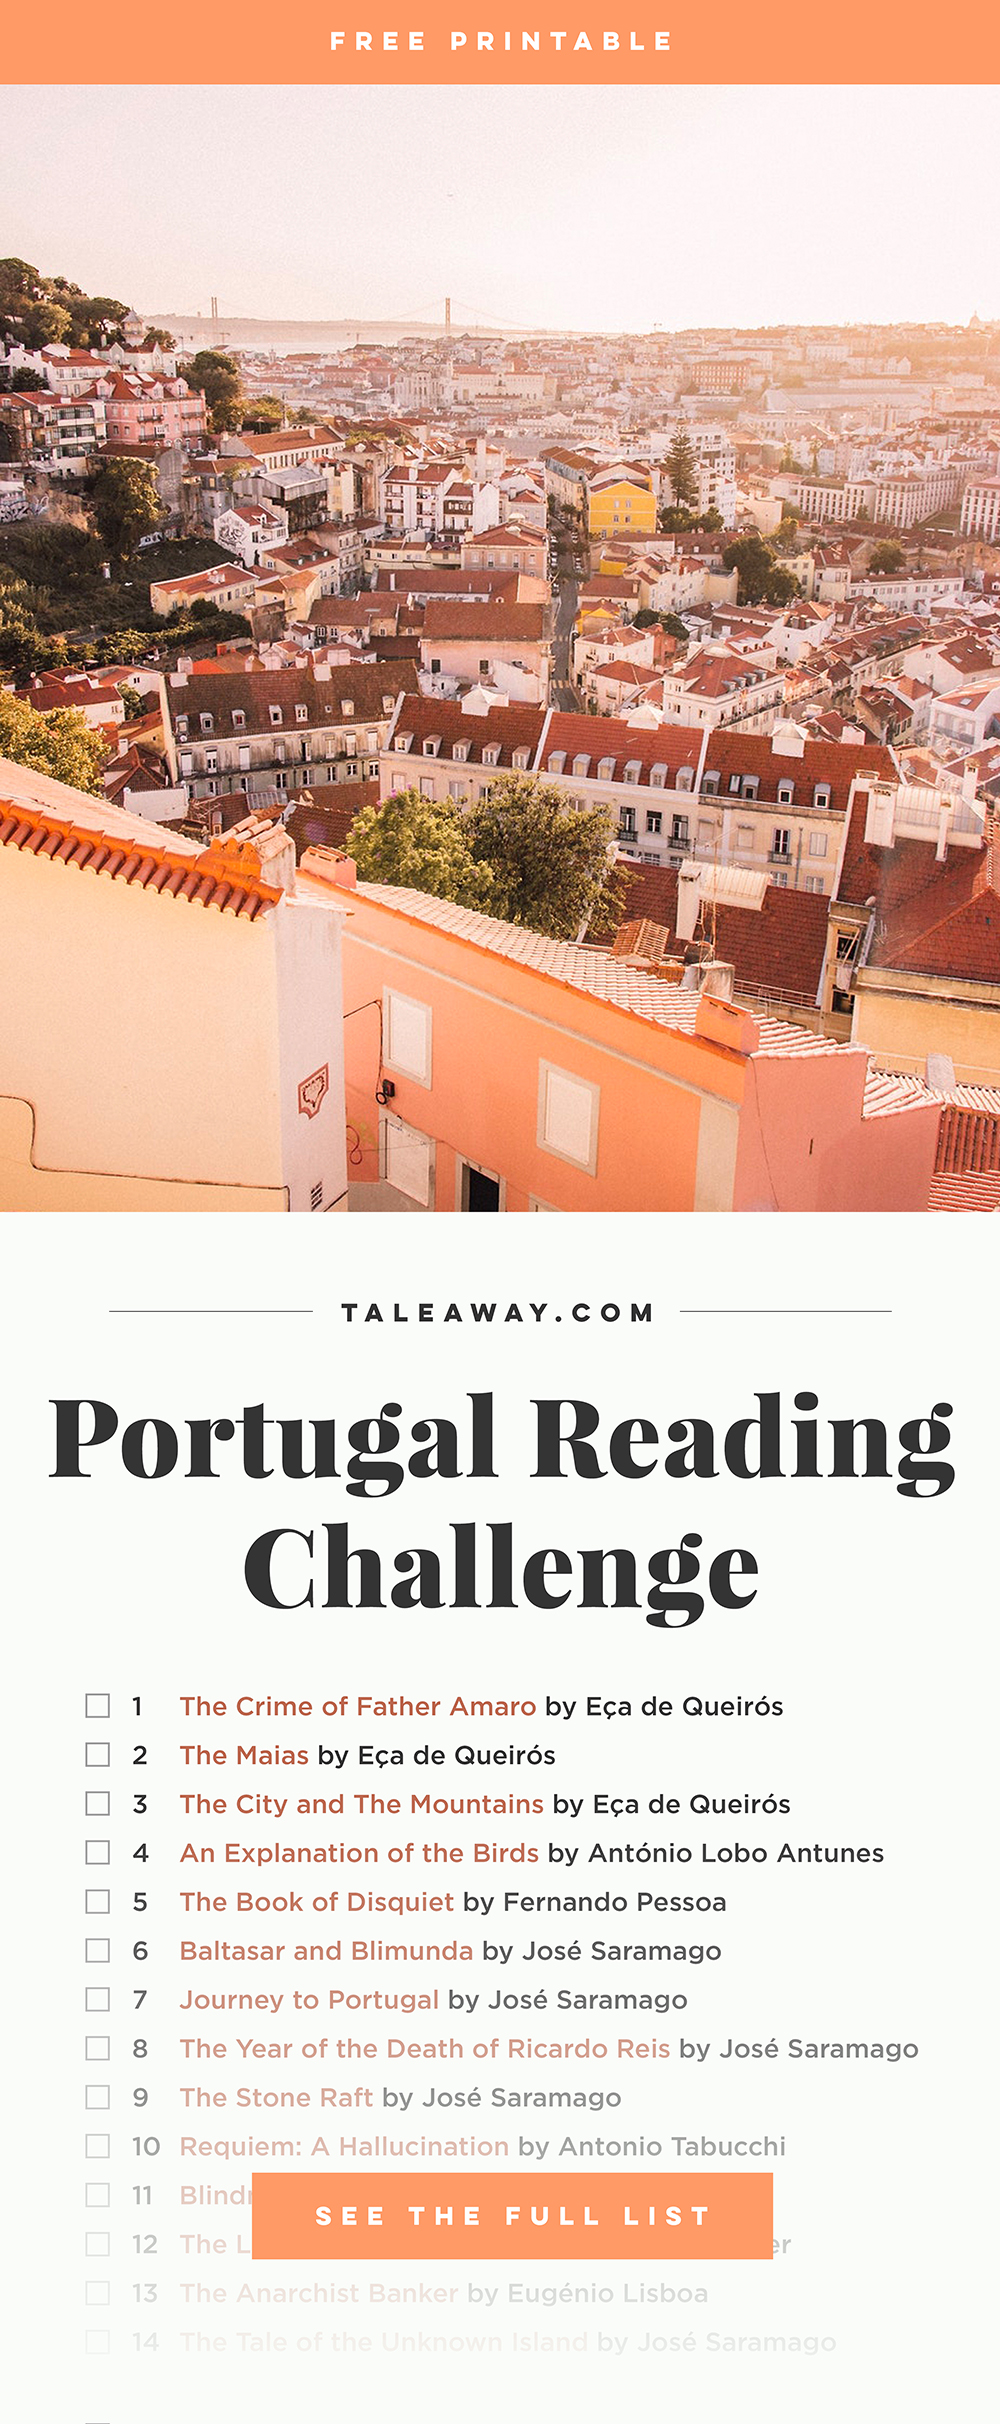 Books Set In Portugal - For more books that inspire travel visit www.taleway.com. best books about portugal, books on portugal history, journey to portugal, best portuguese novels, books set in lisbon, novels set in porto, historical fiction portugal, famous portuguese books, portuguese writers, portuguese literature, portuguese fiction, trip reading, books set in different countries